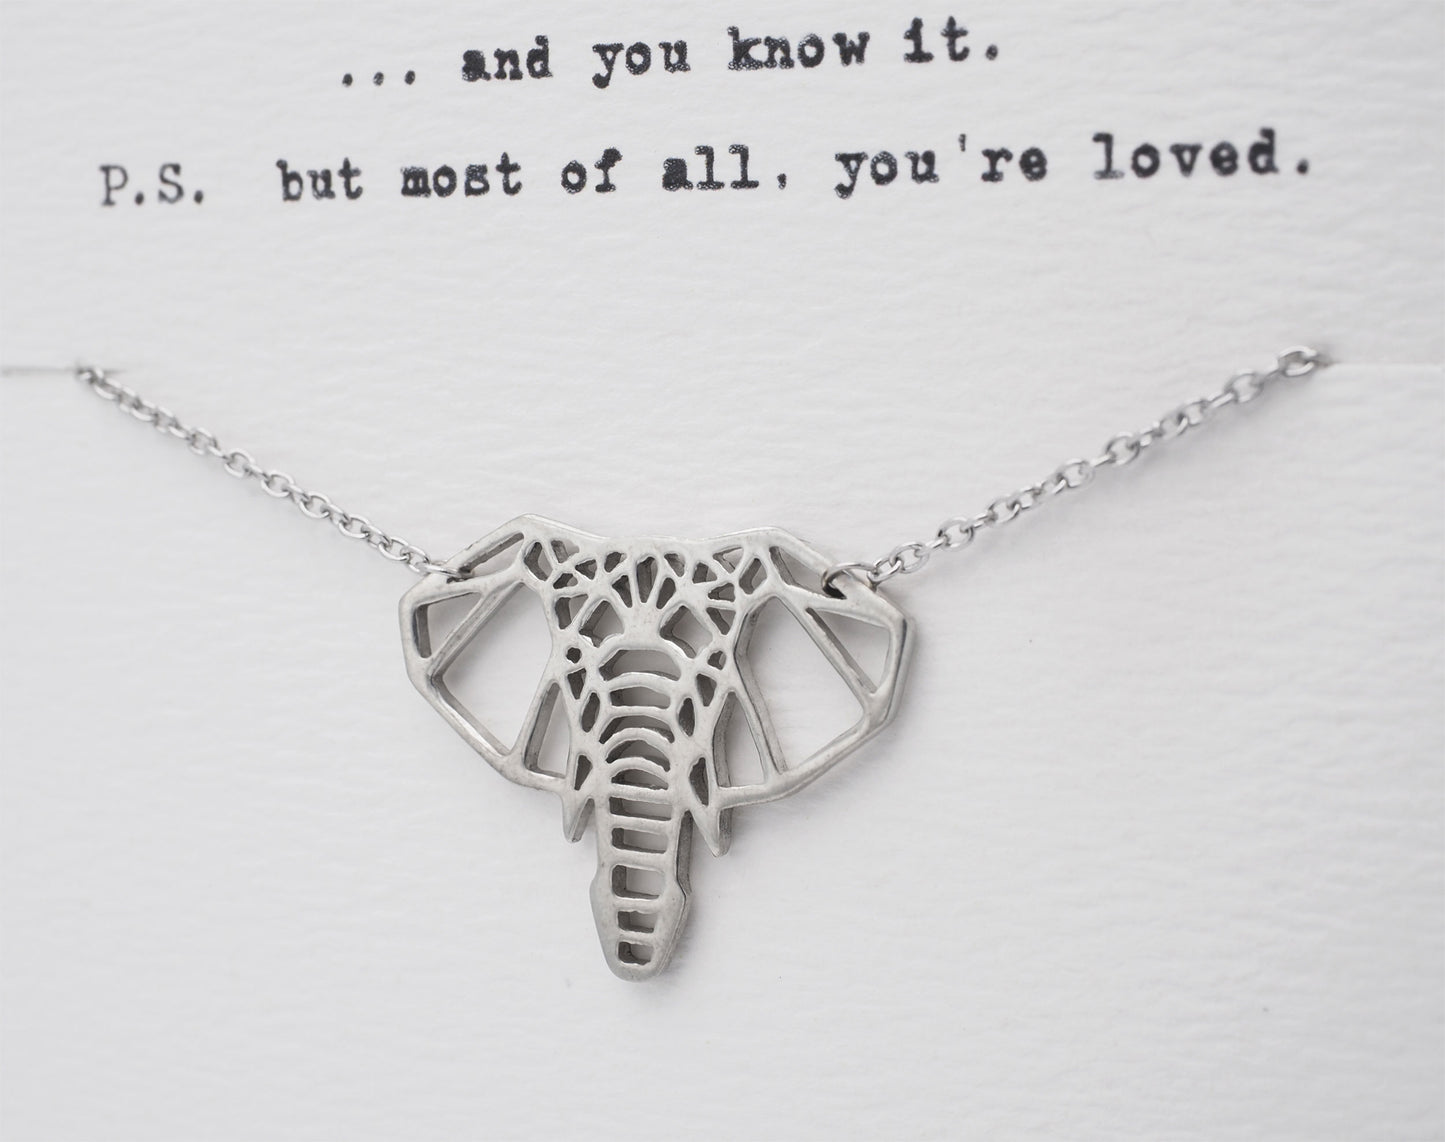 Quinnlyn - Elephant - Necklace - Pendant - Card - Inspirational